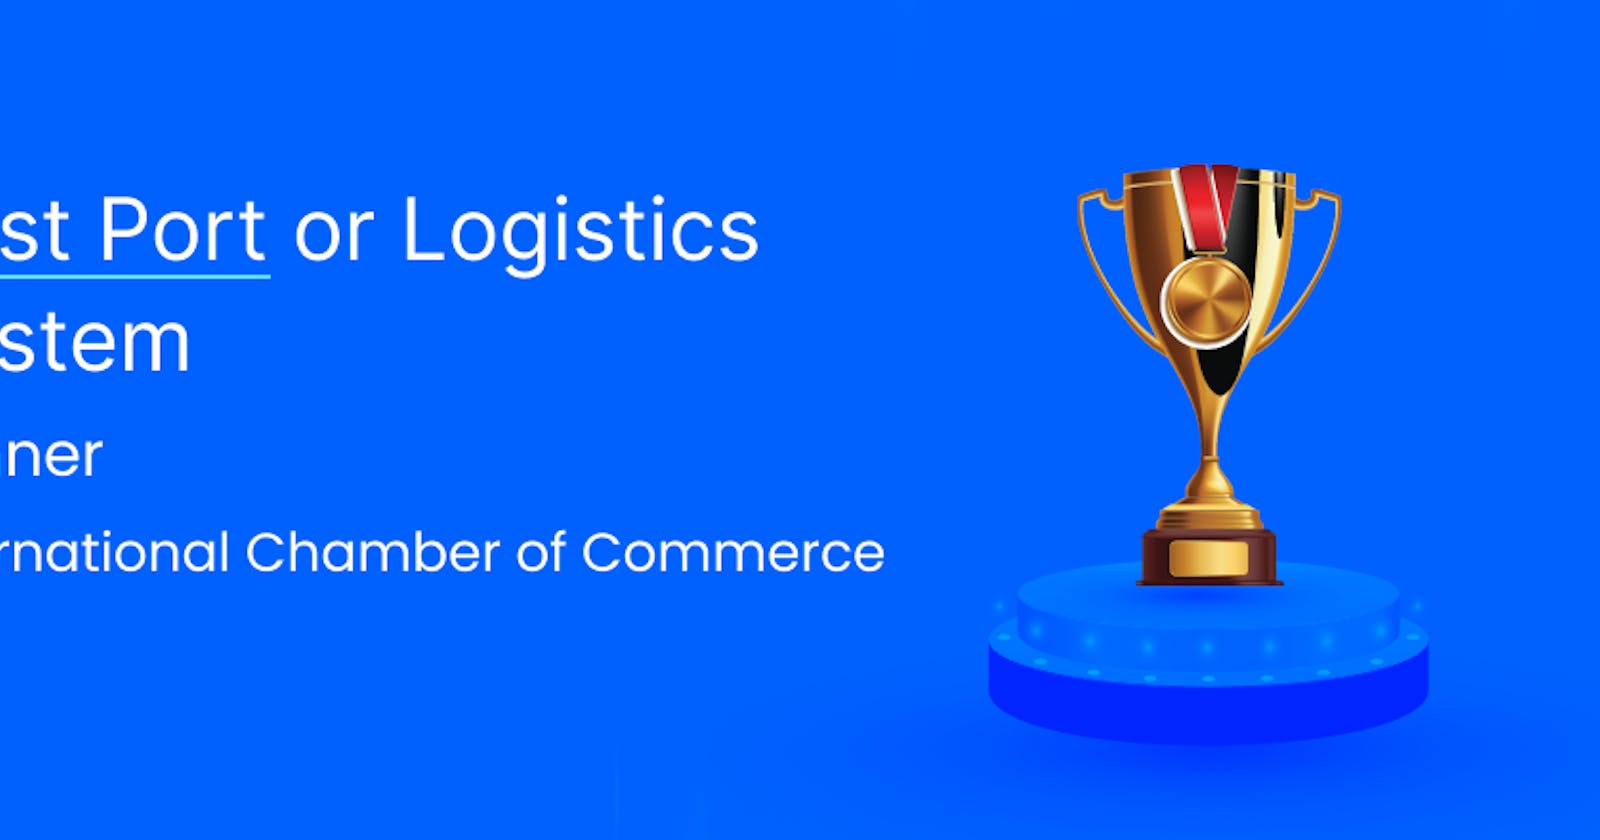 iCustoms Receives ICC Digital Trade Award for “Best Port or Logistics Systems